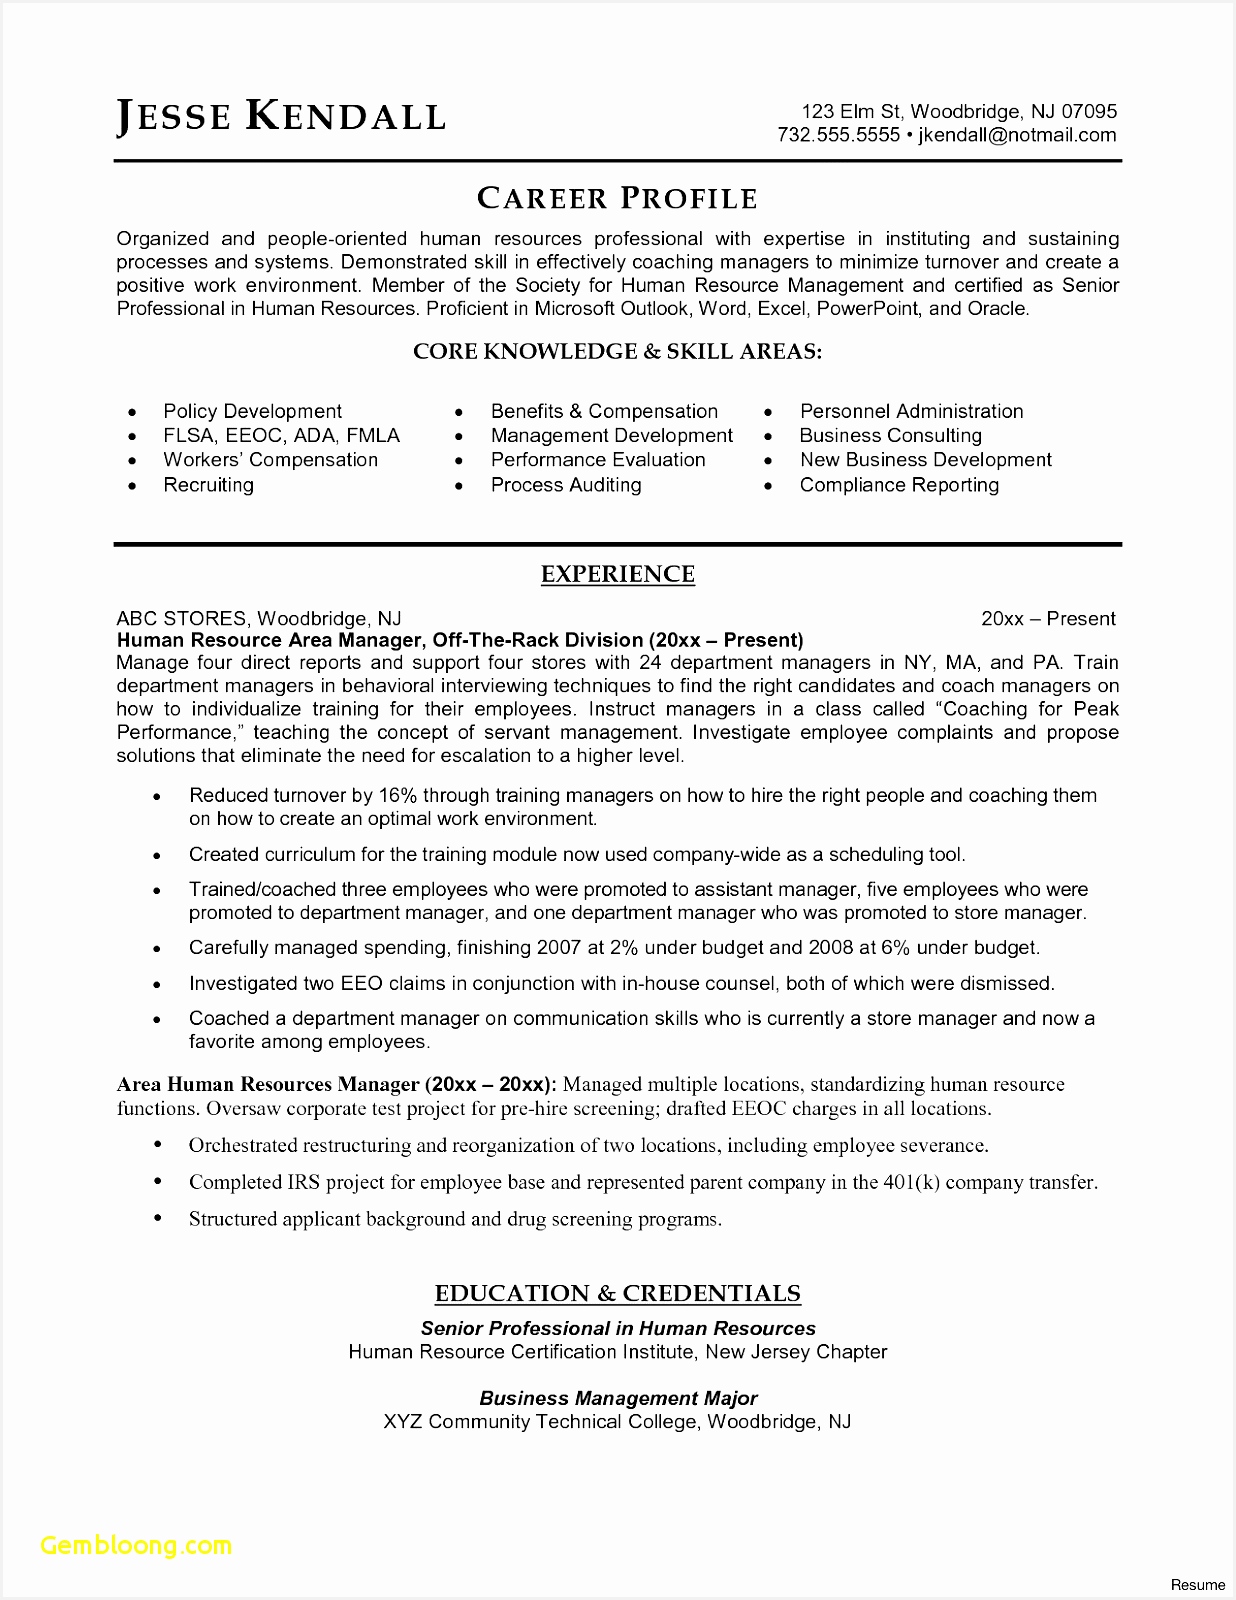 Microsoft Word Resume Templates Download now Resume Template Microsoft Word Professional Job Resume Template Od16001236